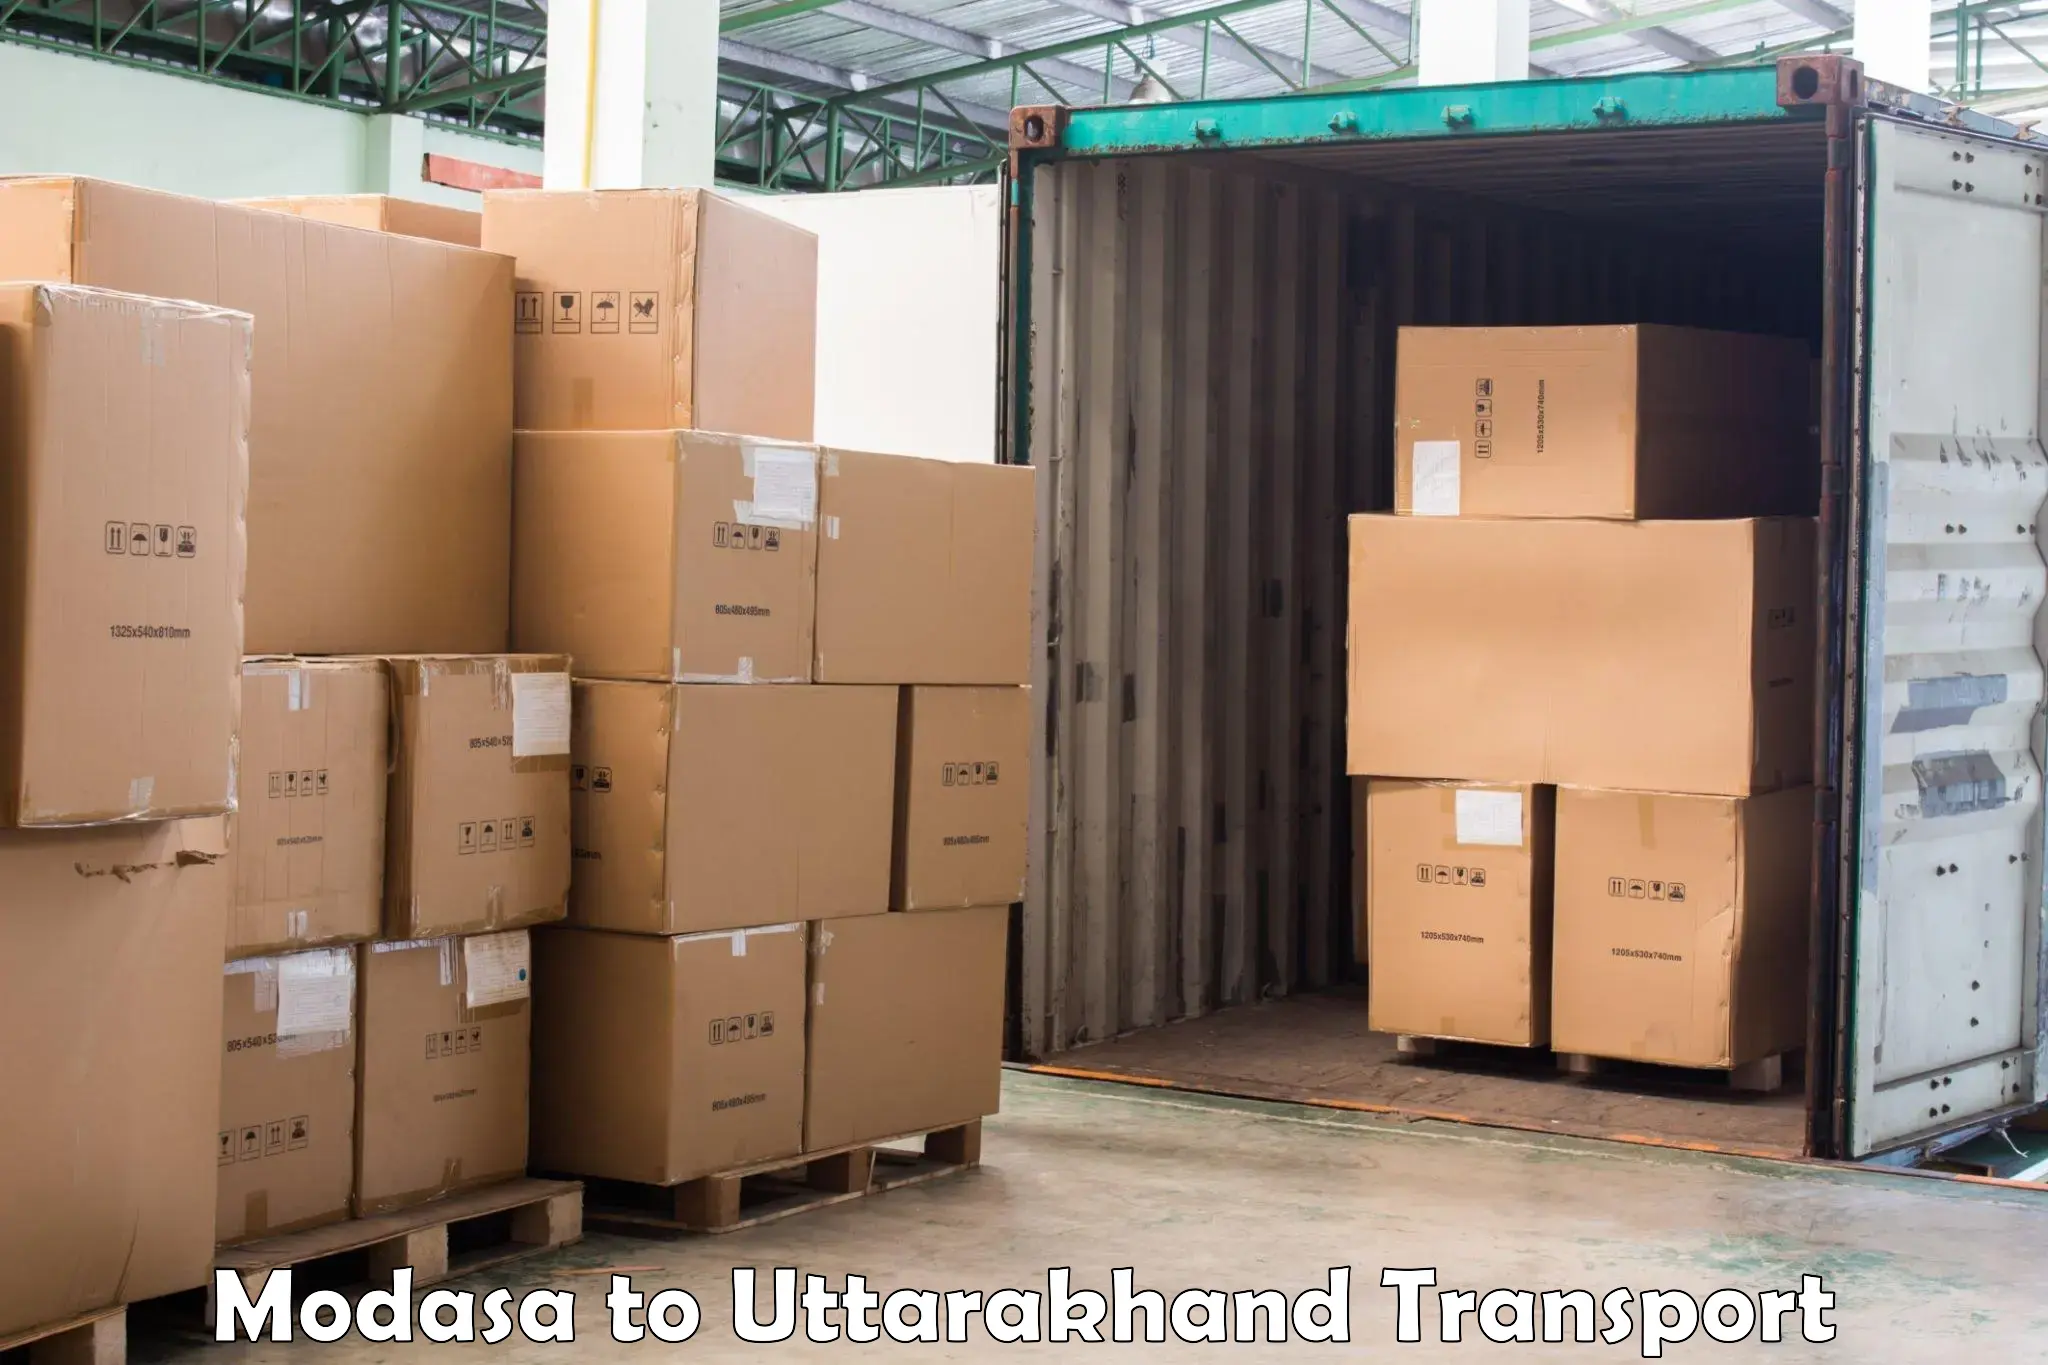 Transport bike from one state to another Modasa to Uttarakhand